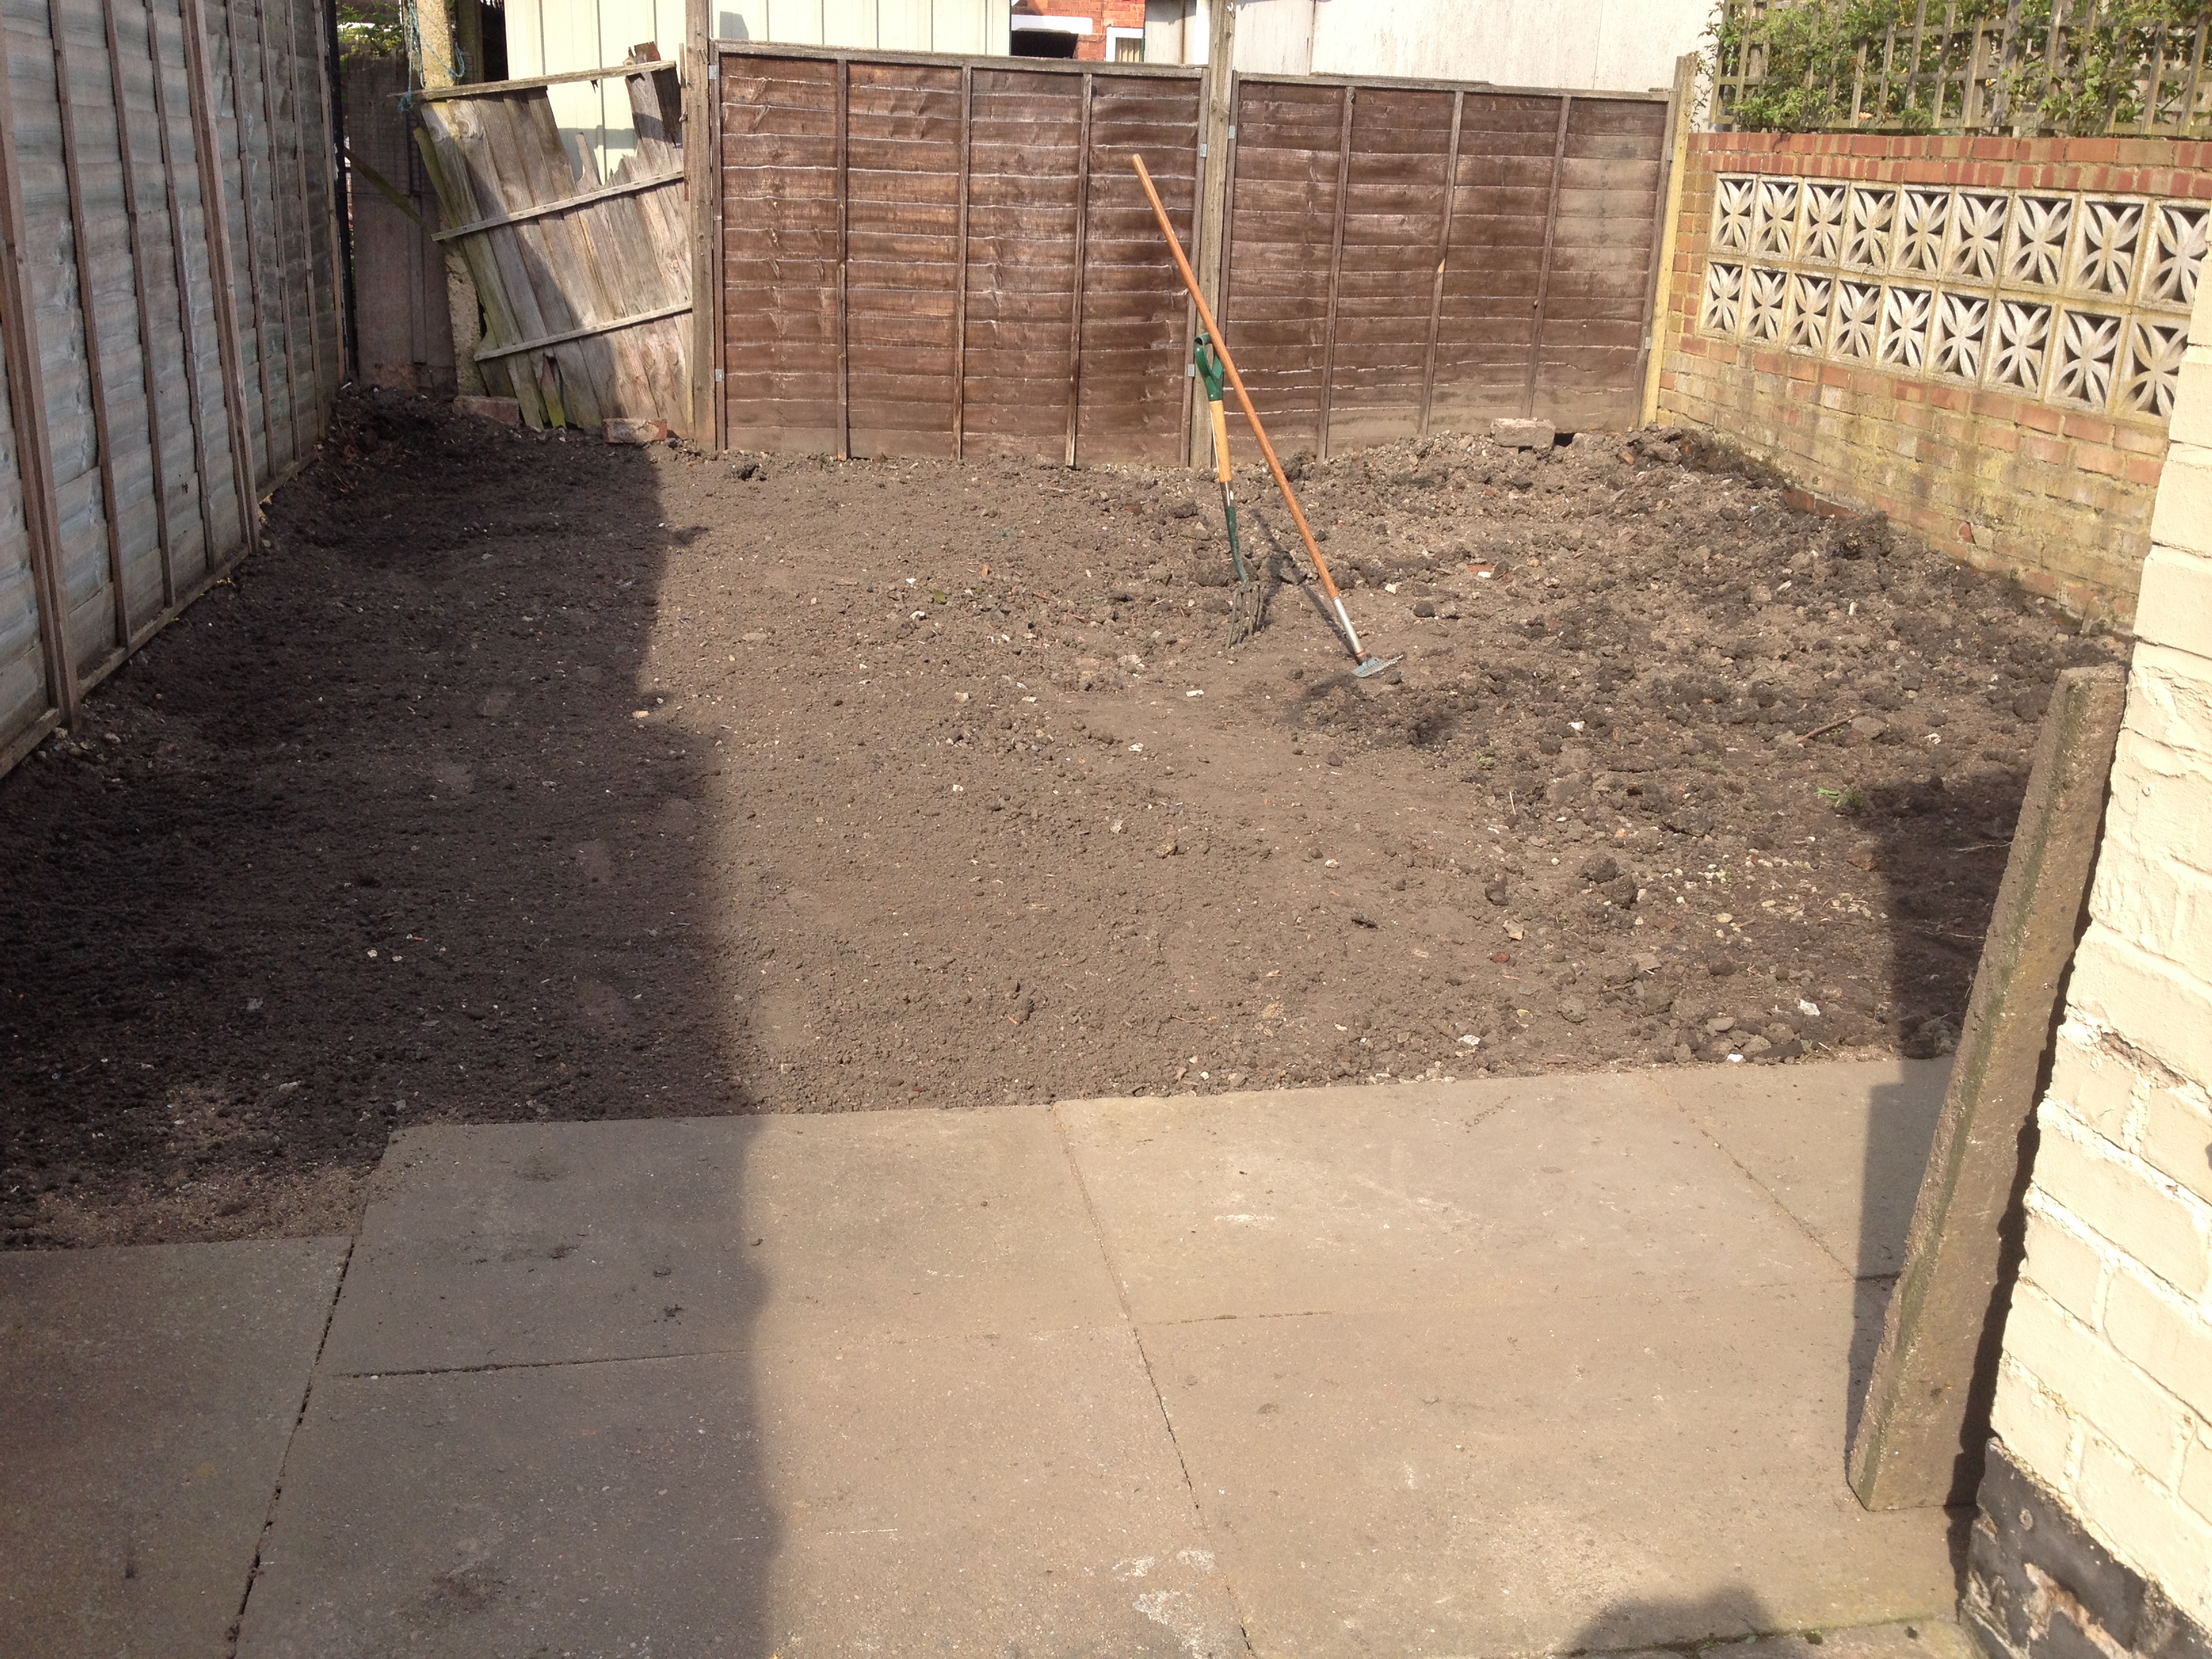 Thanks Mum & Rob for helping fix the garden. Waiting for grass now.